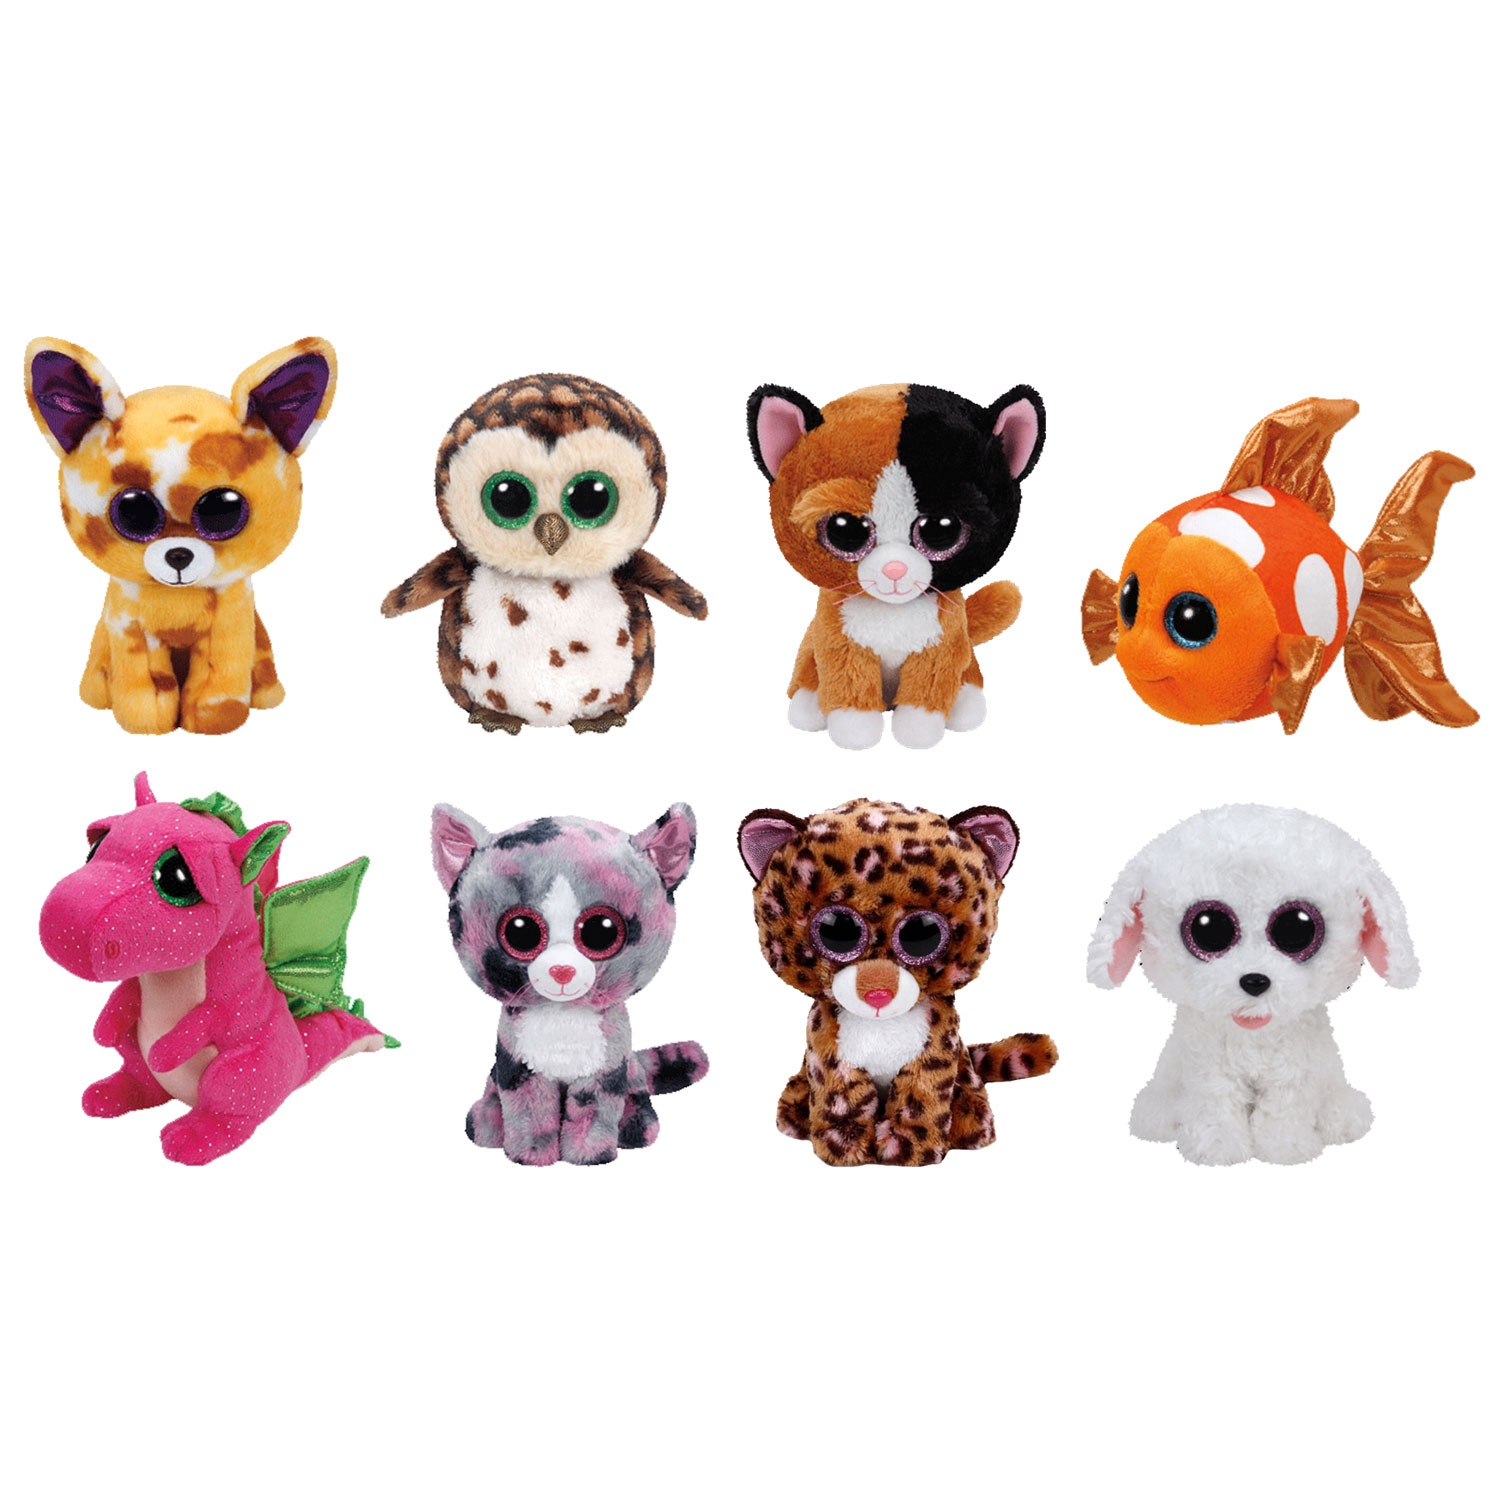 TY Beanie Boos - SET of 8 Spring 2016 Releases (6 inch) (Darla, Pablo, Lindi, Pippie, Sami +3)